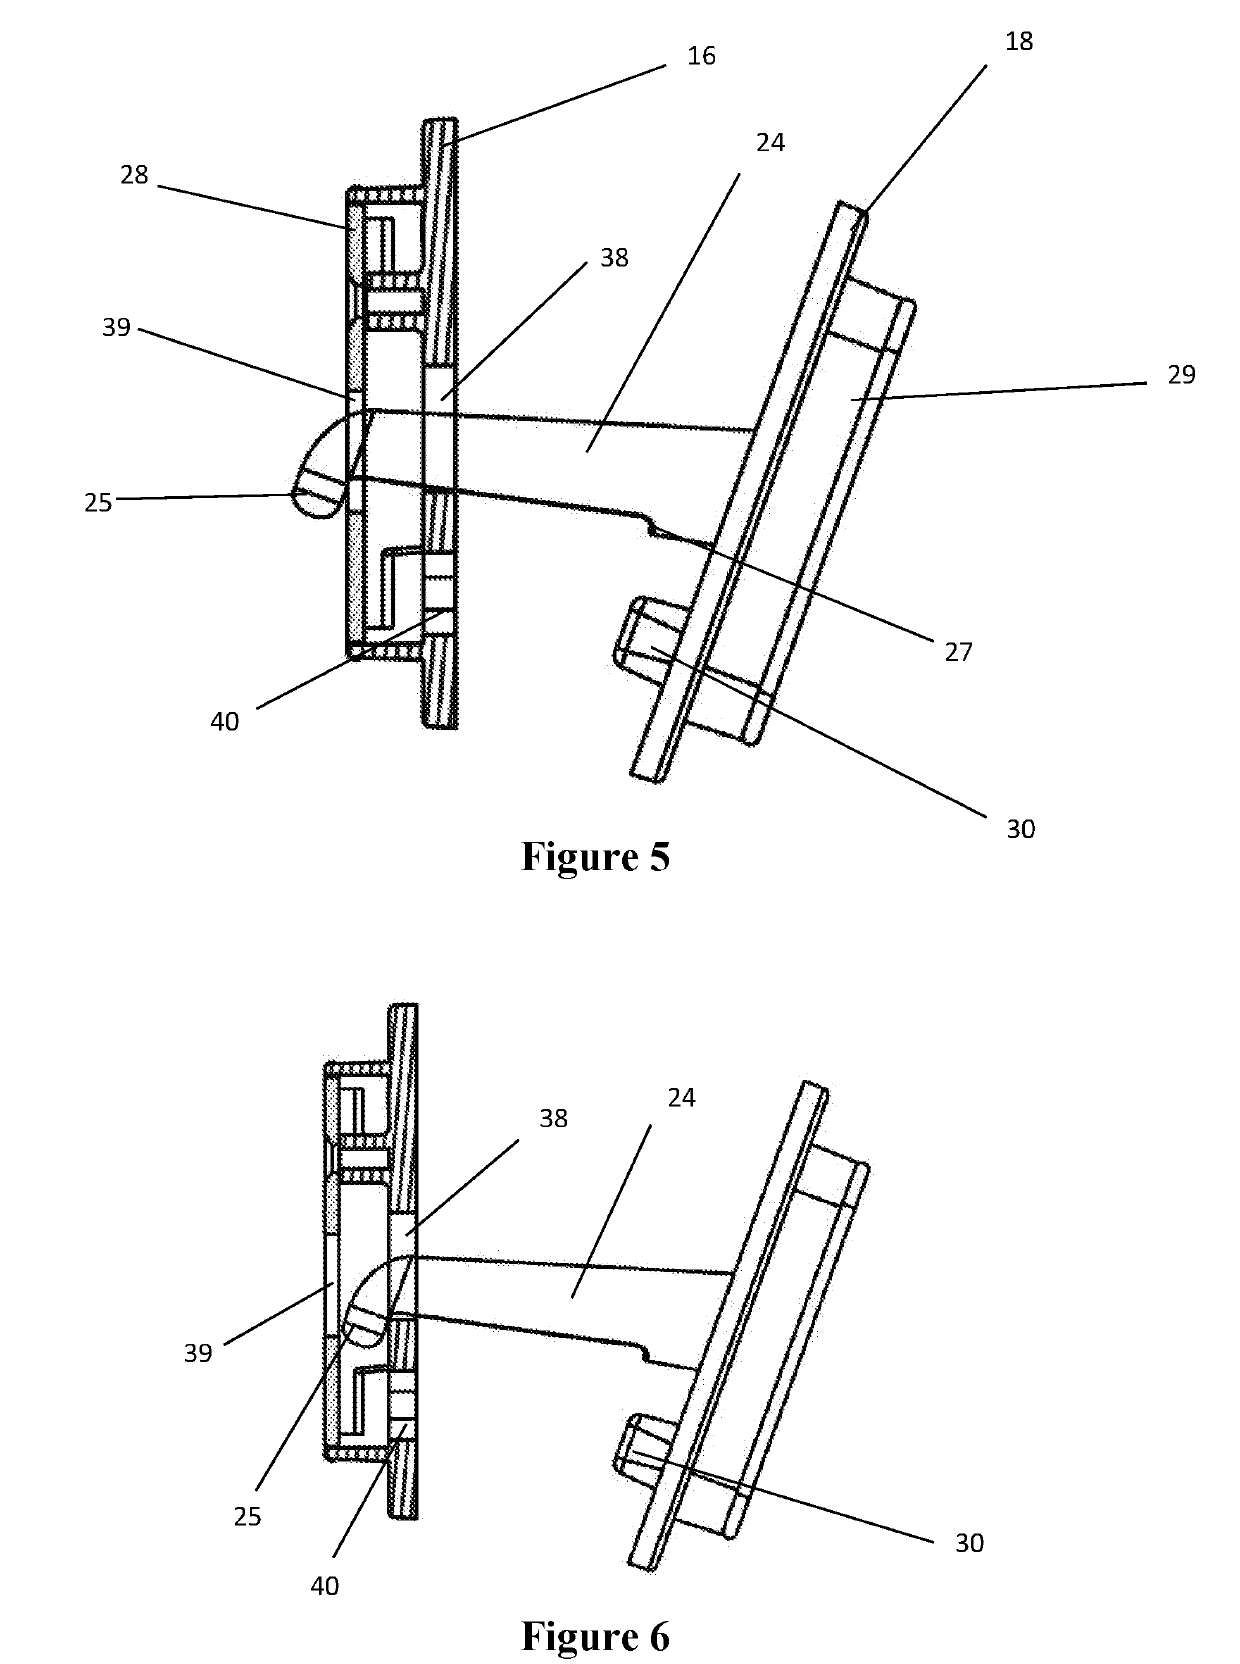 Apparatus for catching improperly attached garment manikin limbs